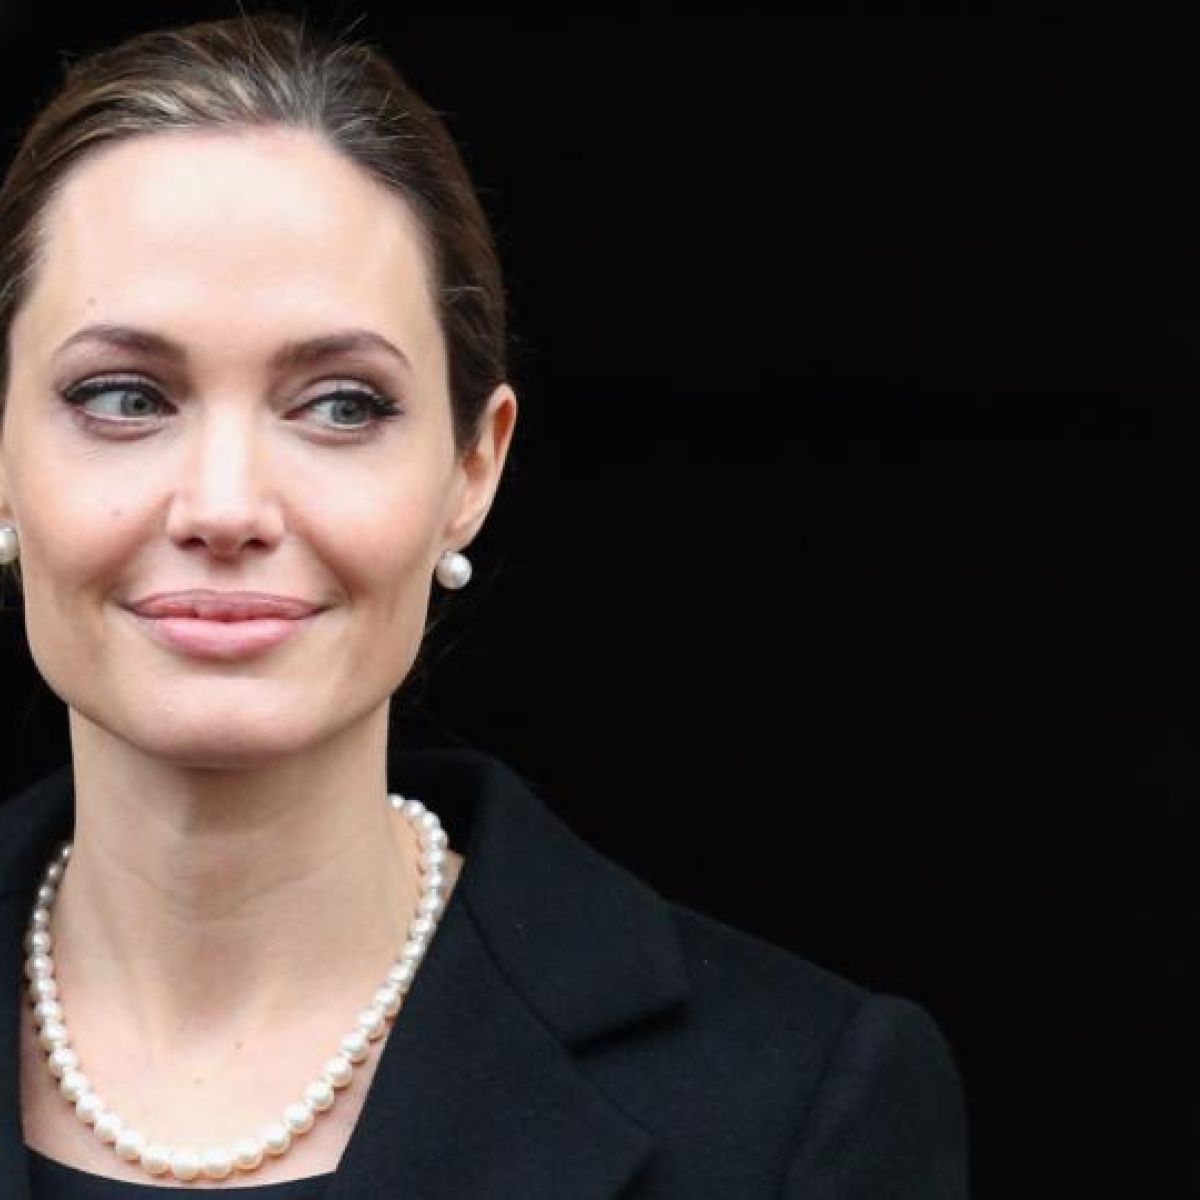 Cool, calm nature of Angelina choice of is impressive